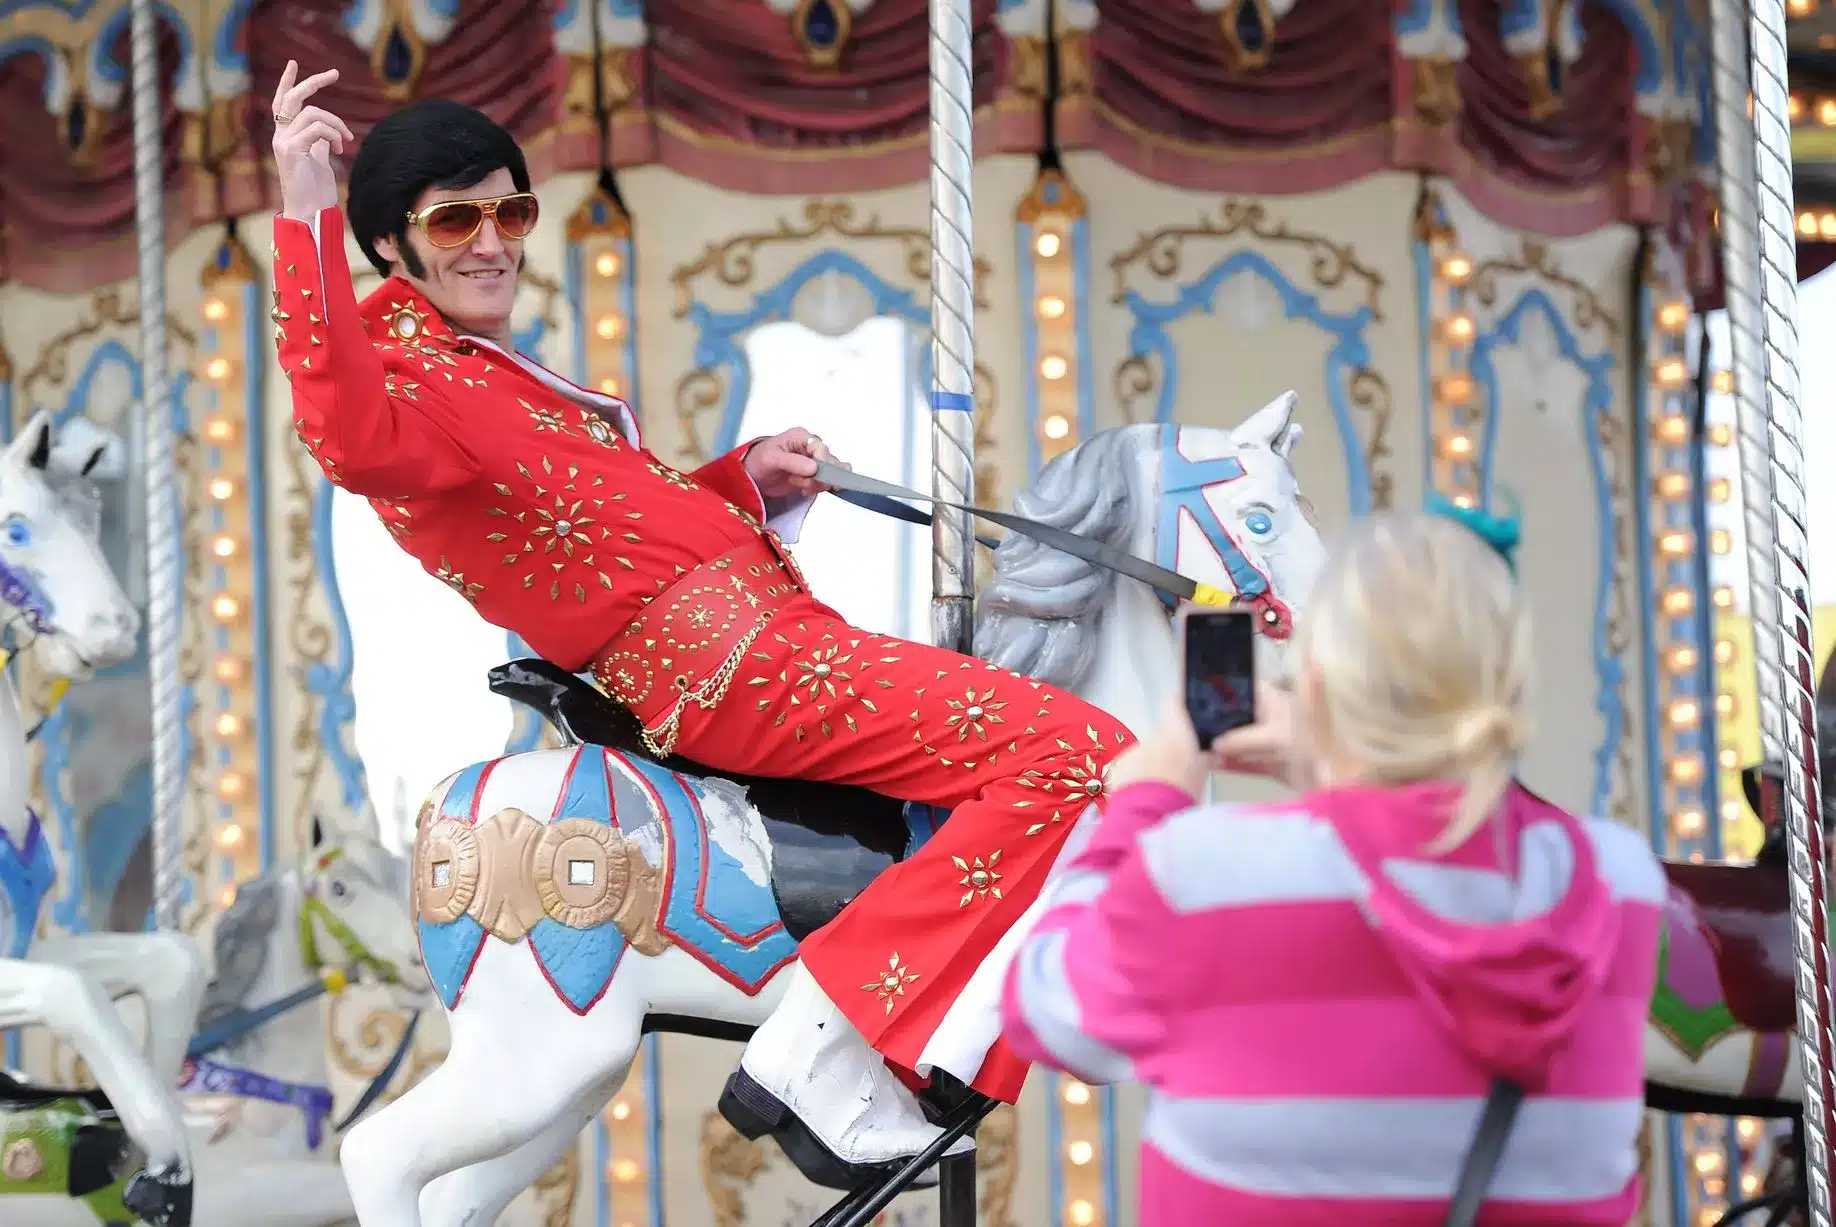 Porthcawl Elvis Festival: The King’s Spirit Reigns in Wales